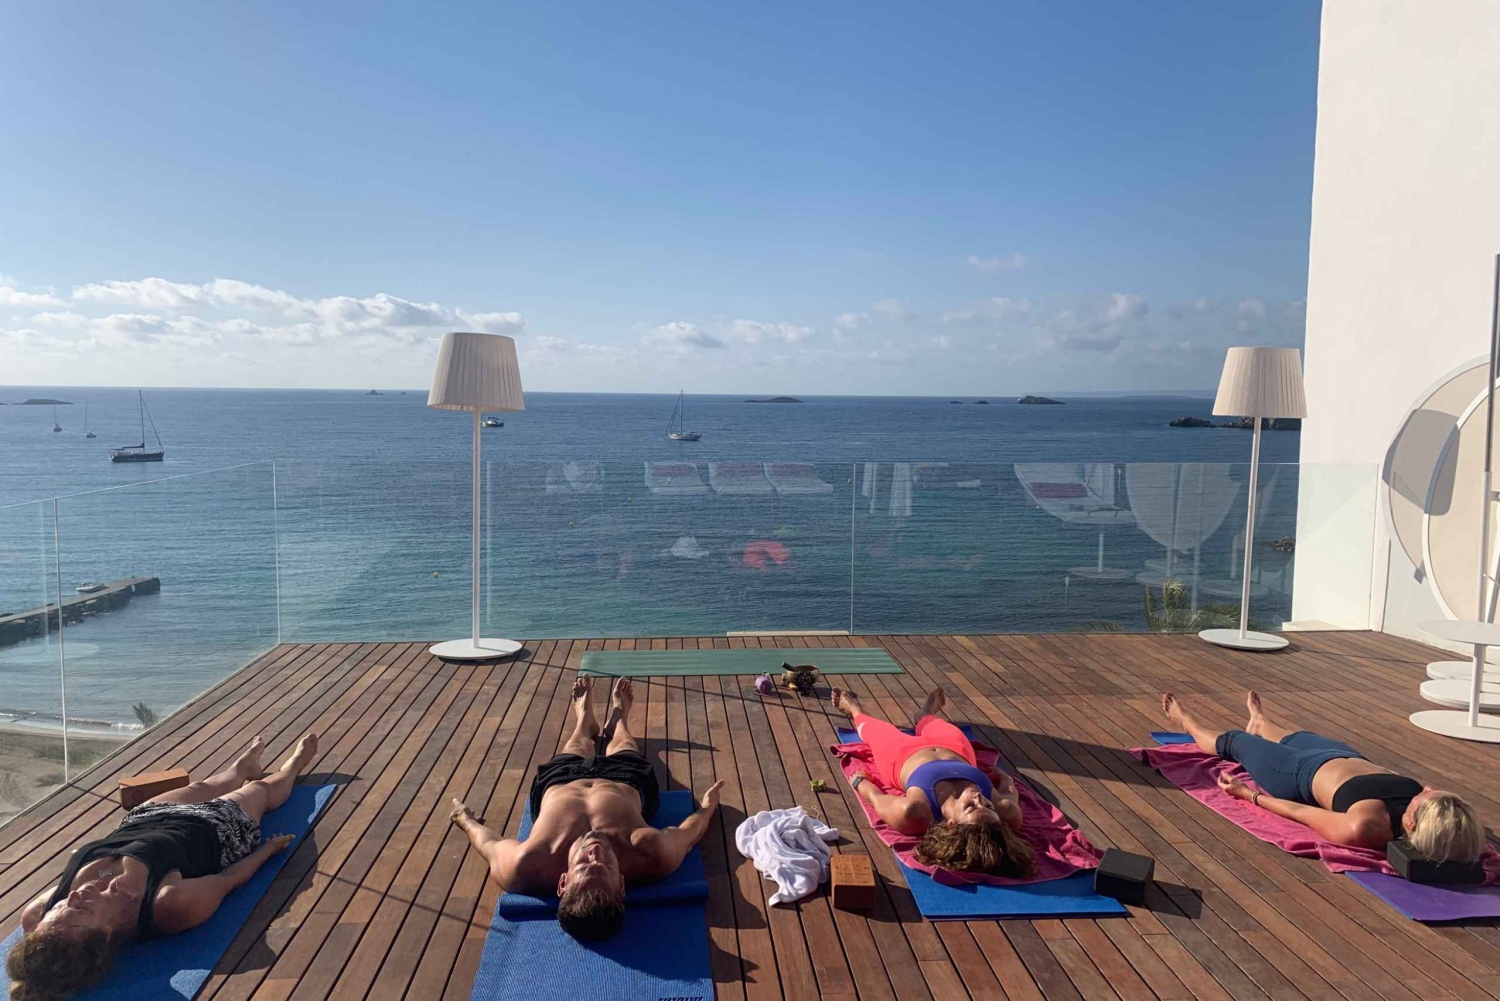 Ibiza: Outdoor Yoga and Breathwork Class with Gear Included